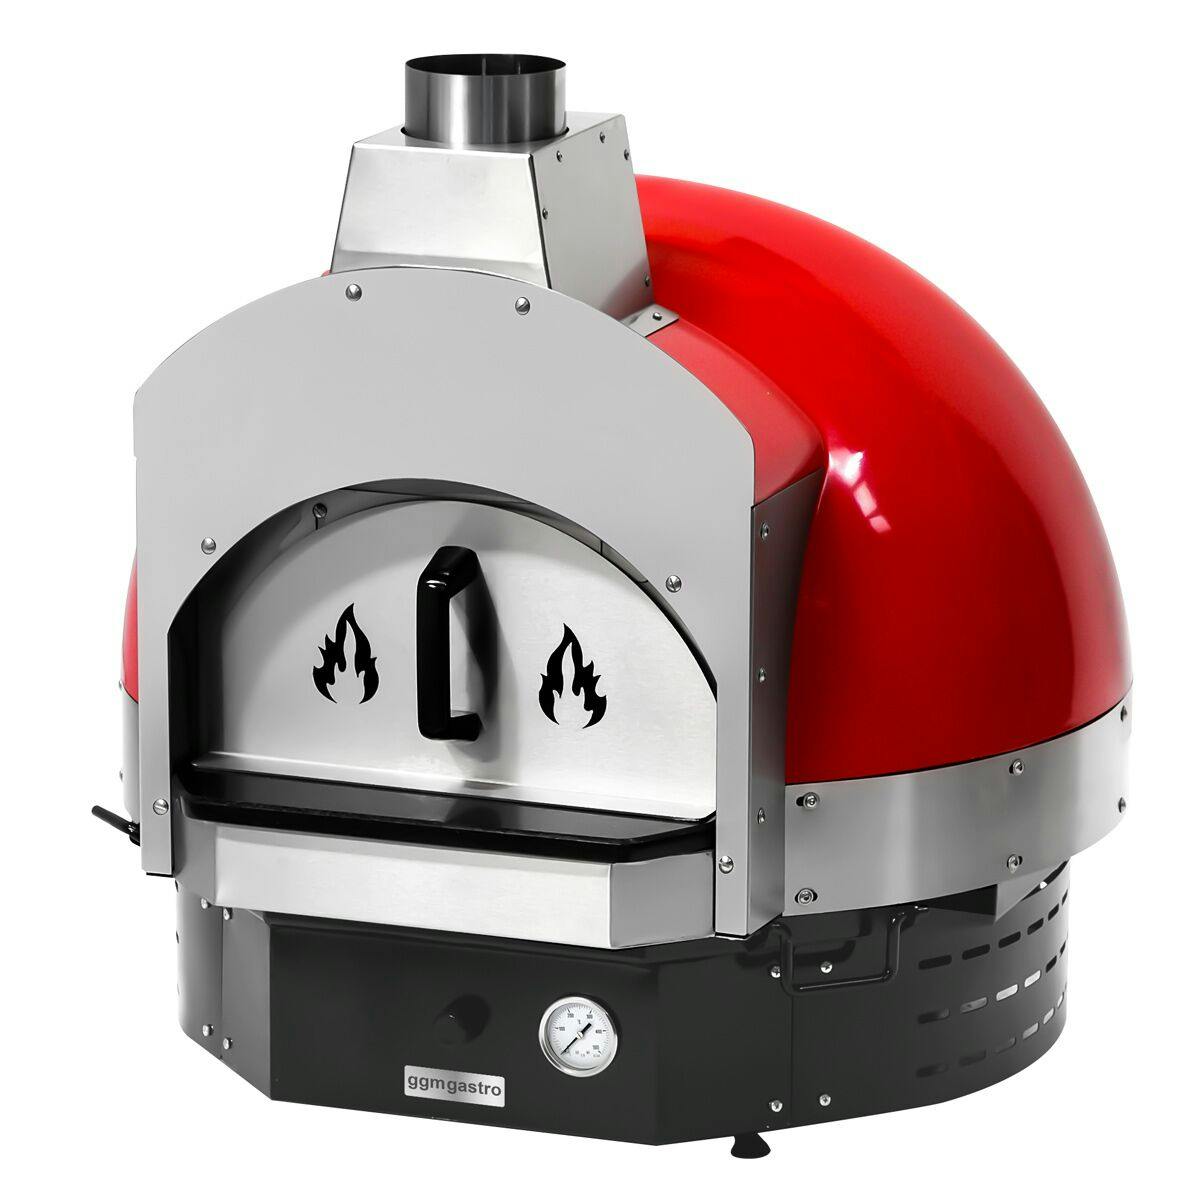 Wooden pizza oven red - incl. base - height: 0.83 m	